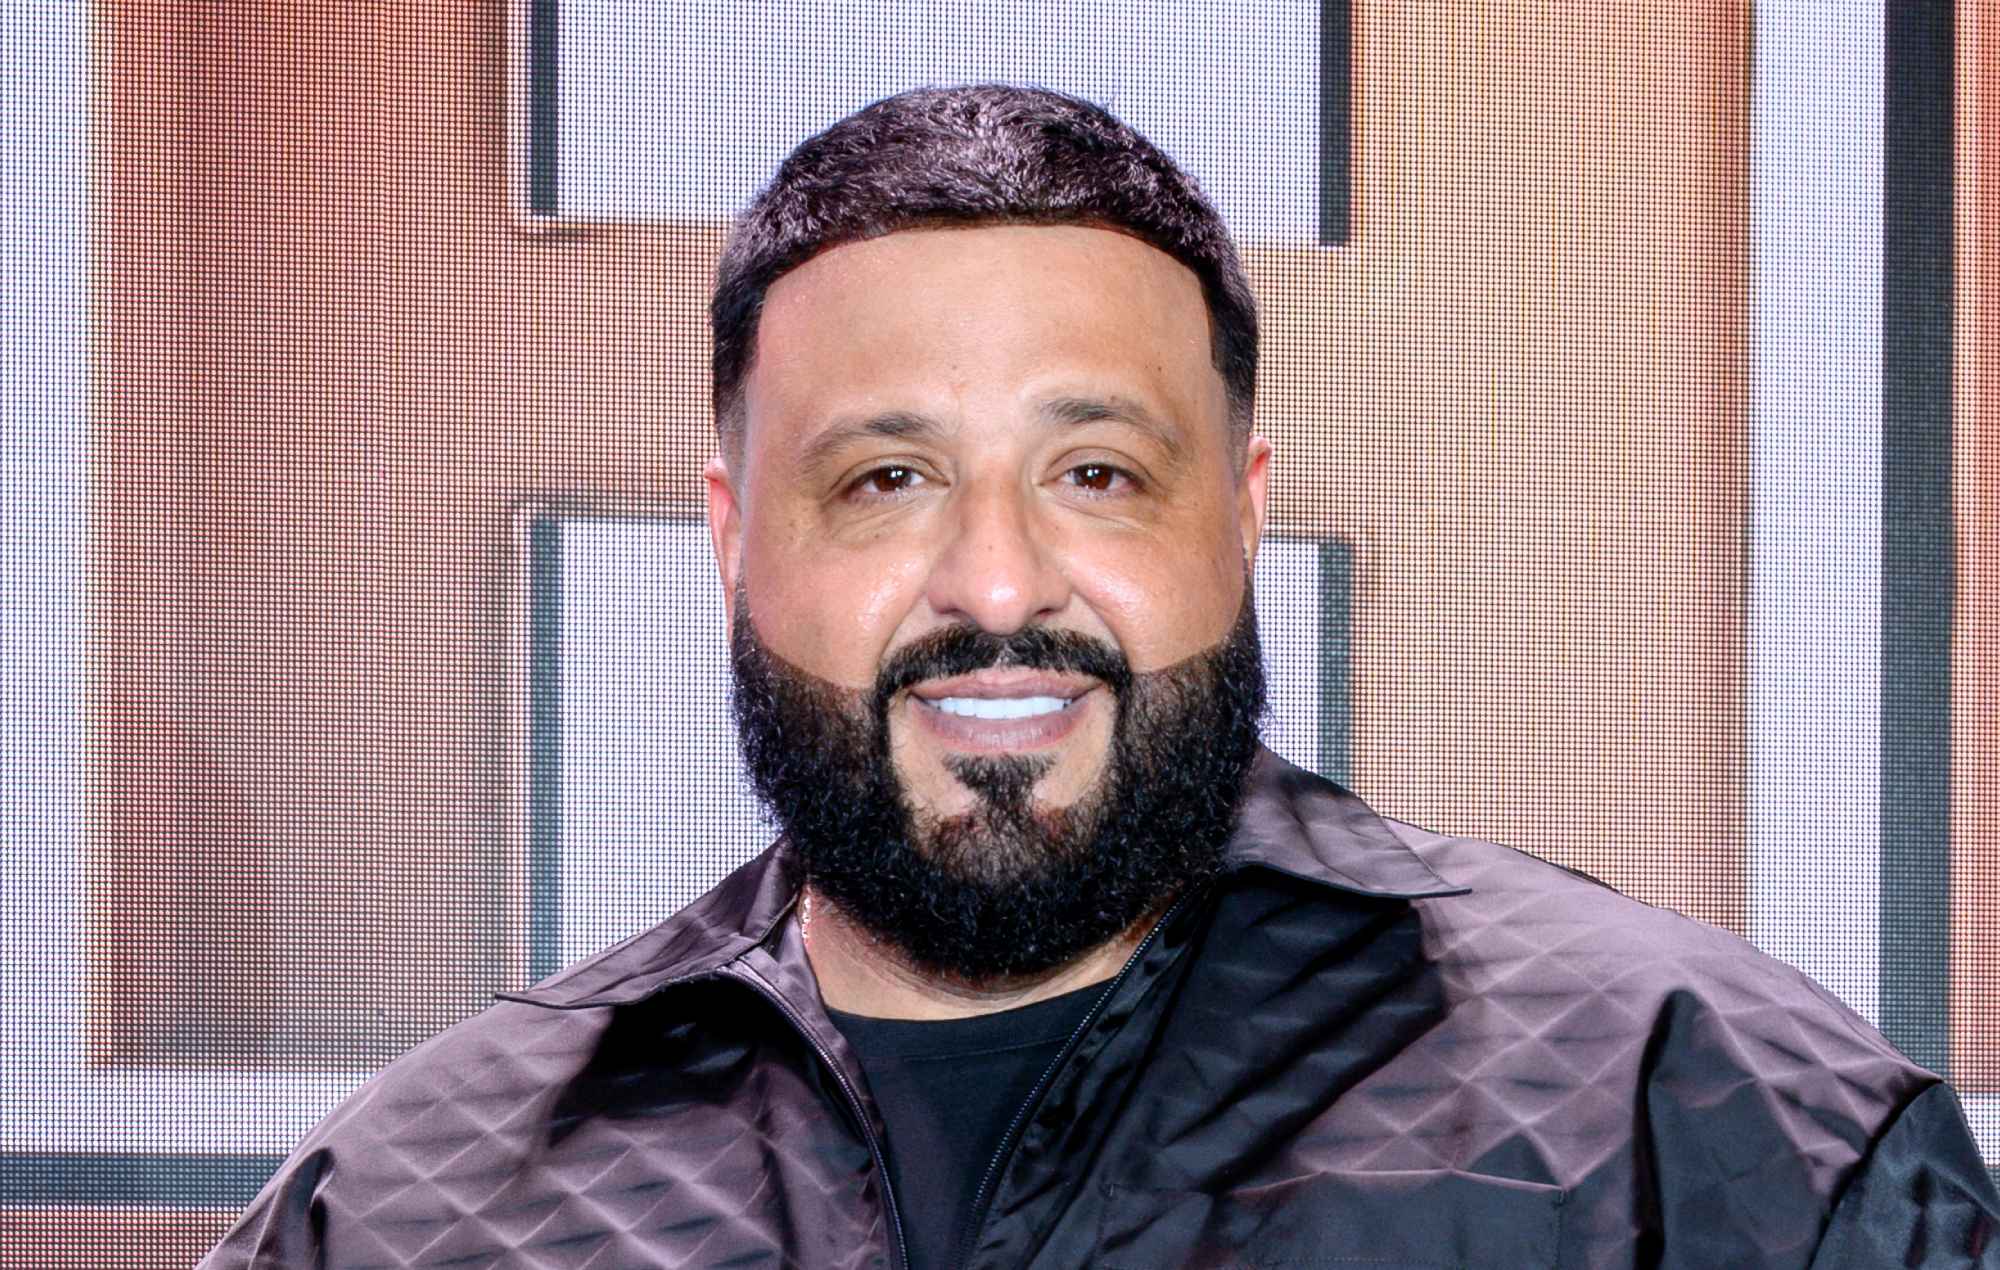 DJ Khaled ‘blessed’ to join Def Jam Recordings and take his career to the ‘next level’